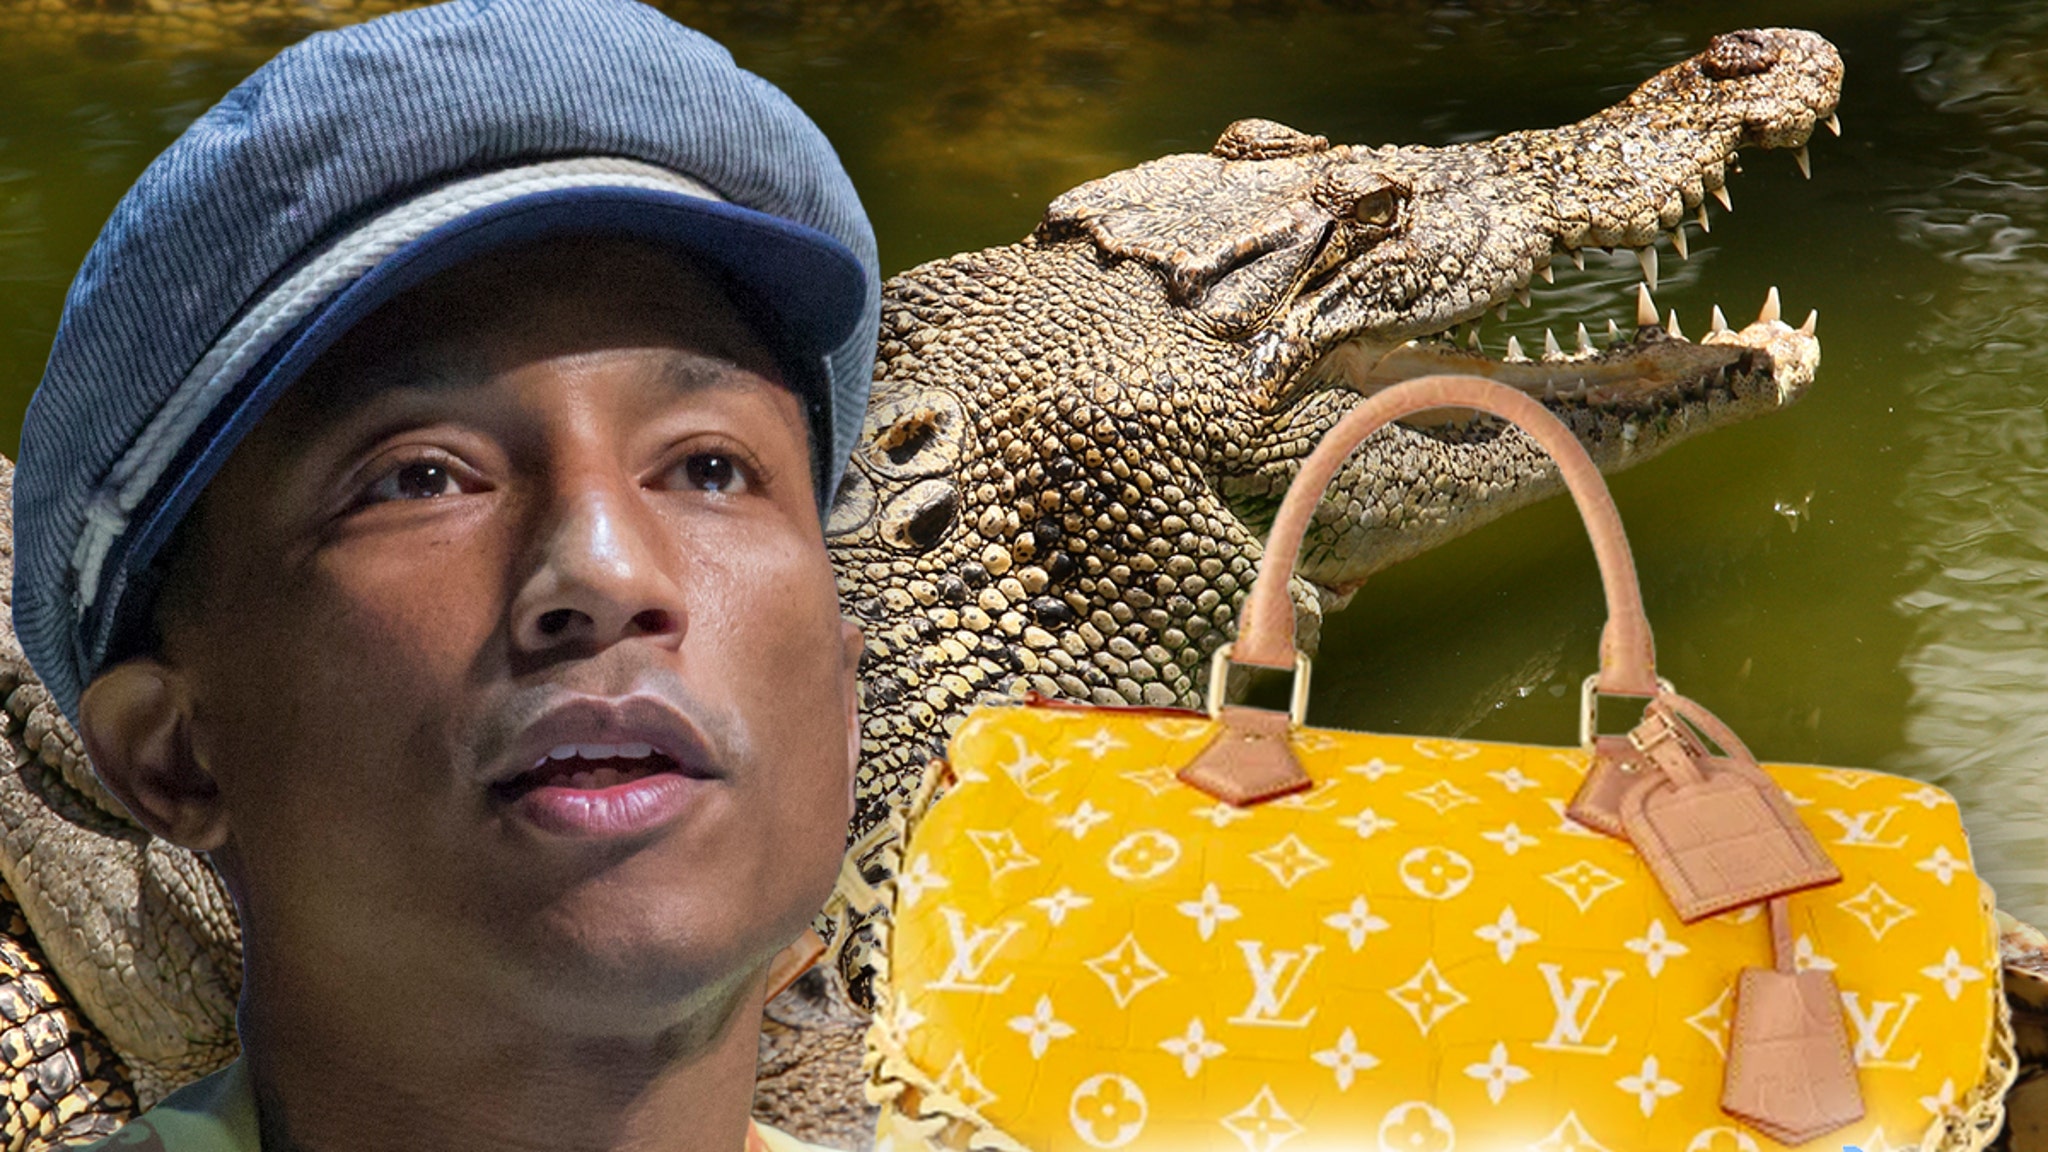 Louis Vuitton unveils $79,000 backpack made from rare crocodile